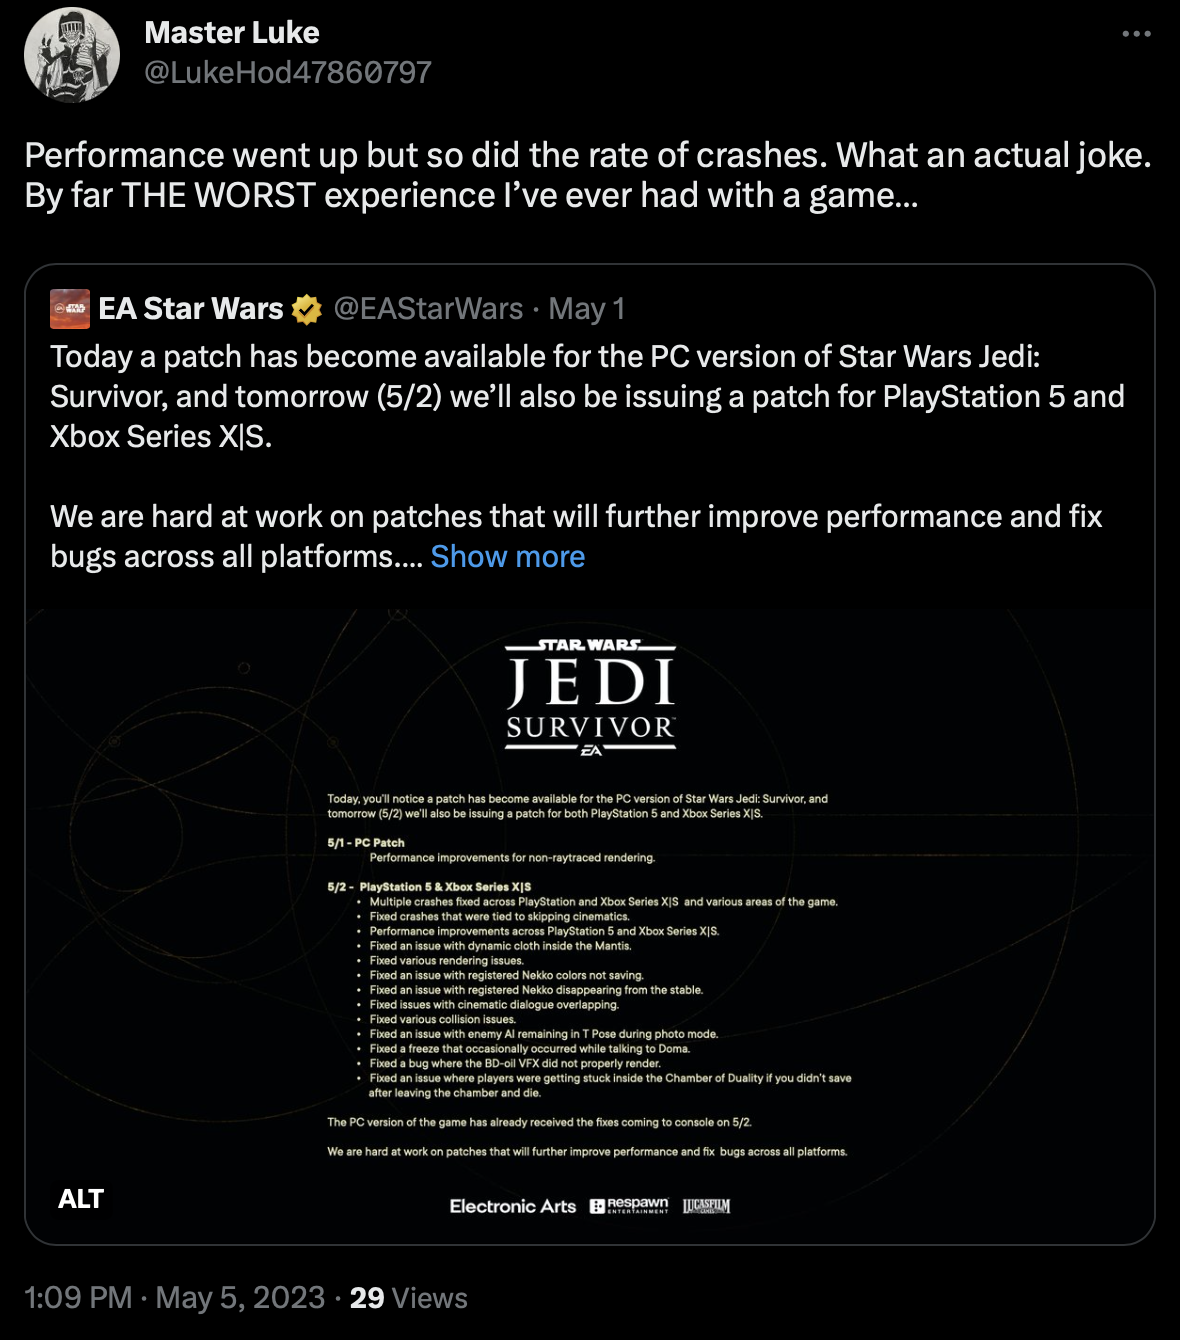 LukeHod47860797 mocks that the recent Star Wars Jedi: Survivor patch has made the game worse via Twitter